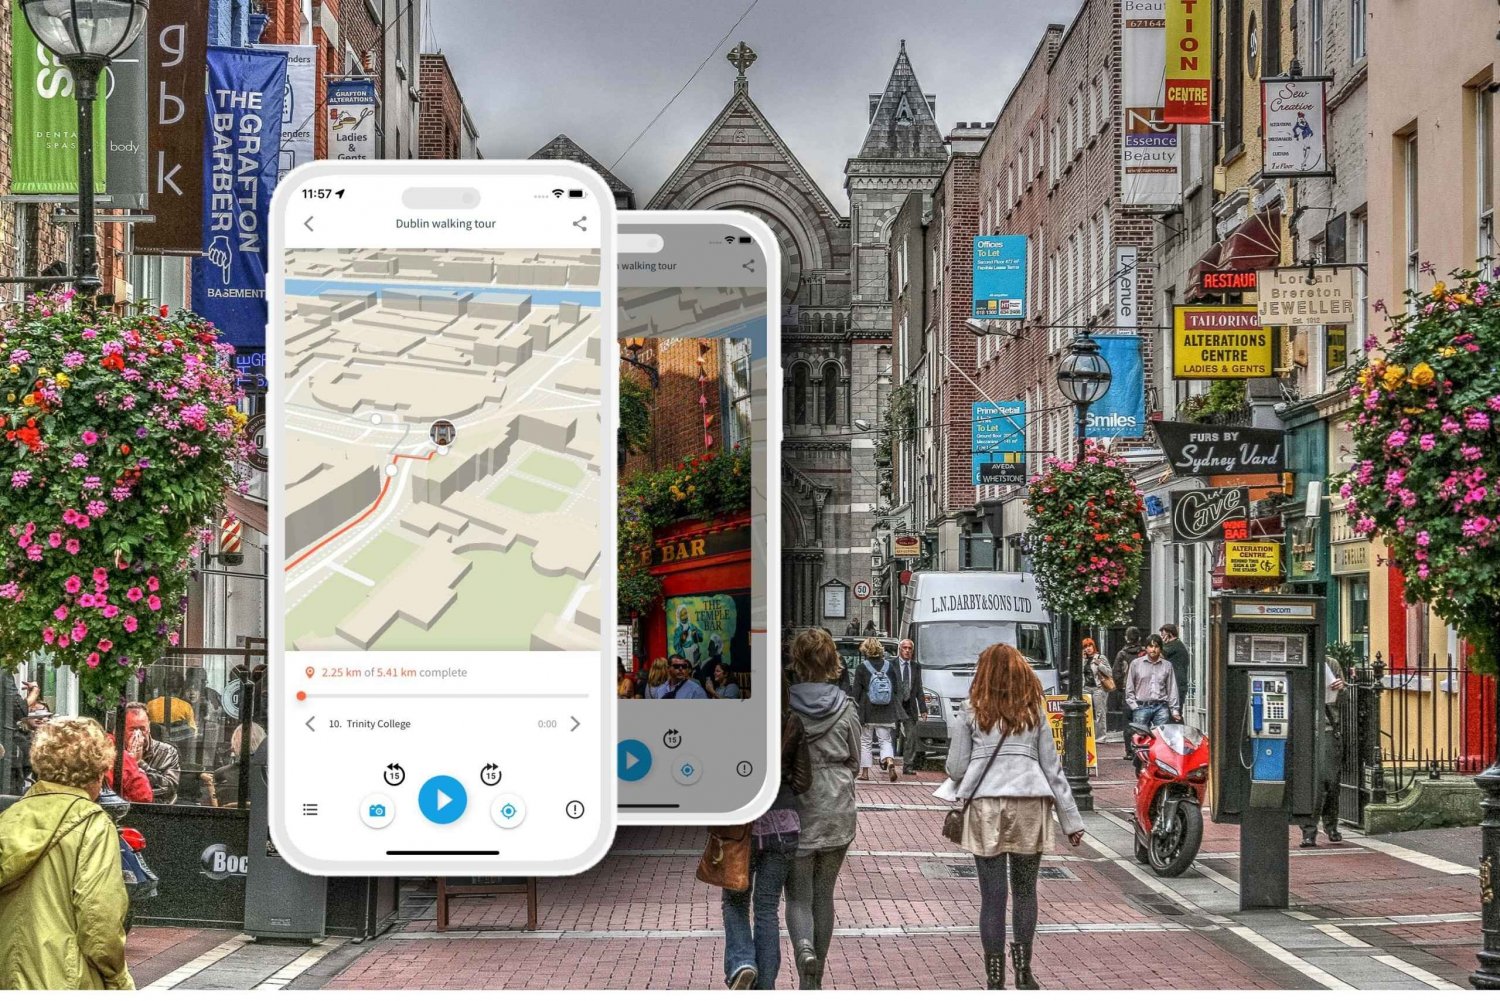 Dublin city tour: audio guide for smartphone in French